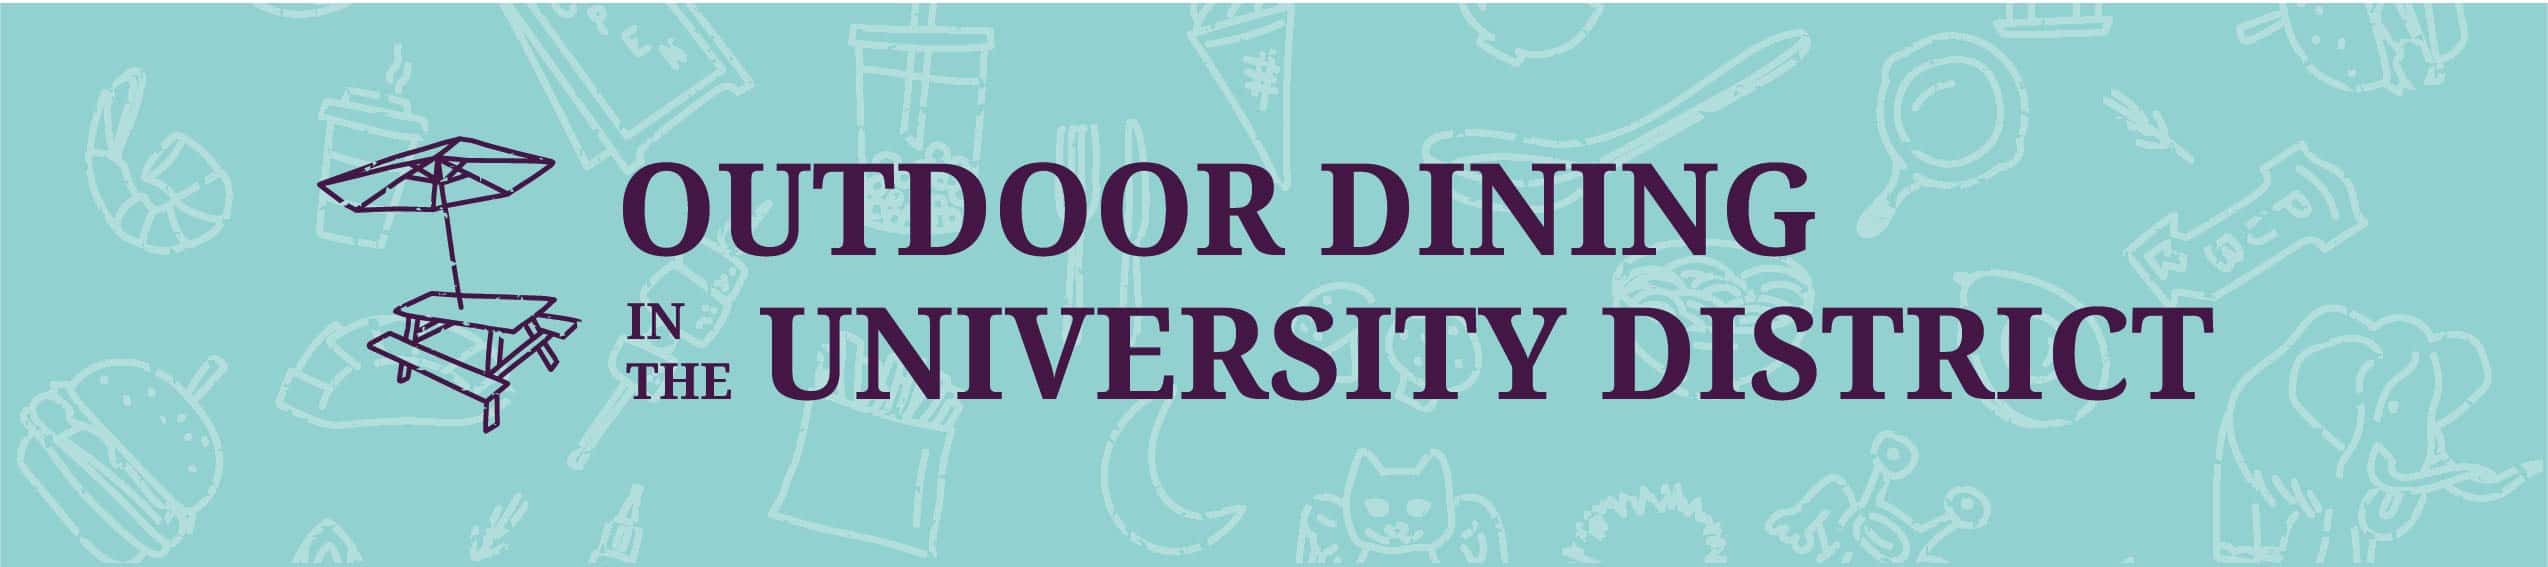 Outdoor Dining in the University District